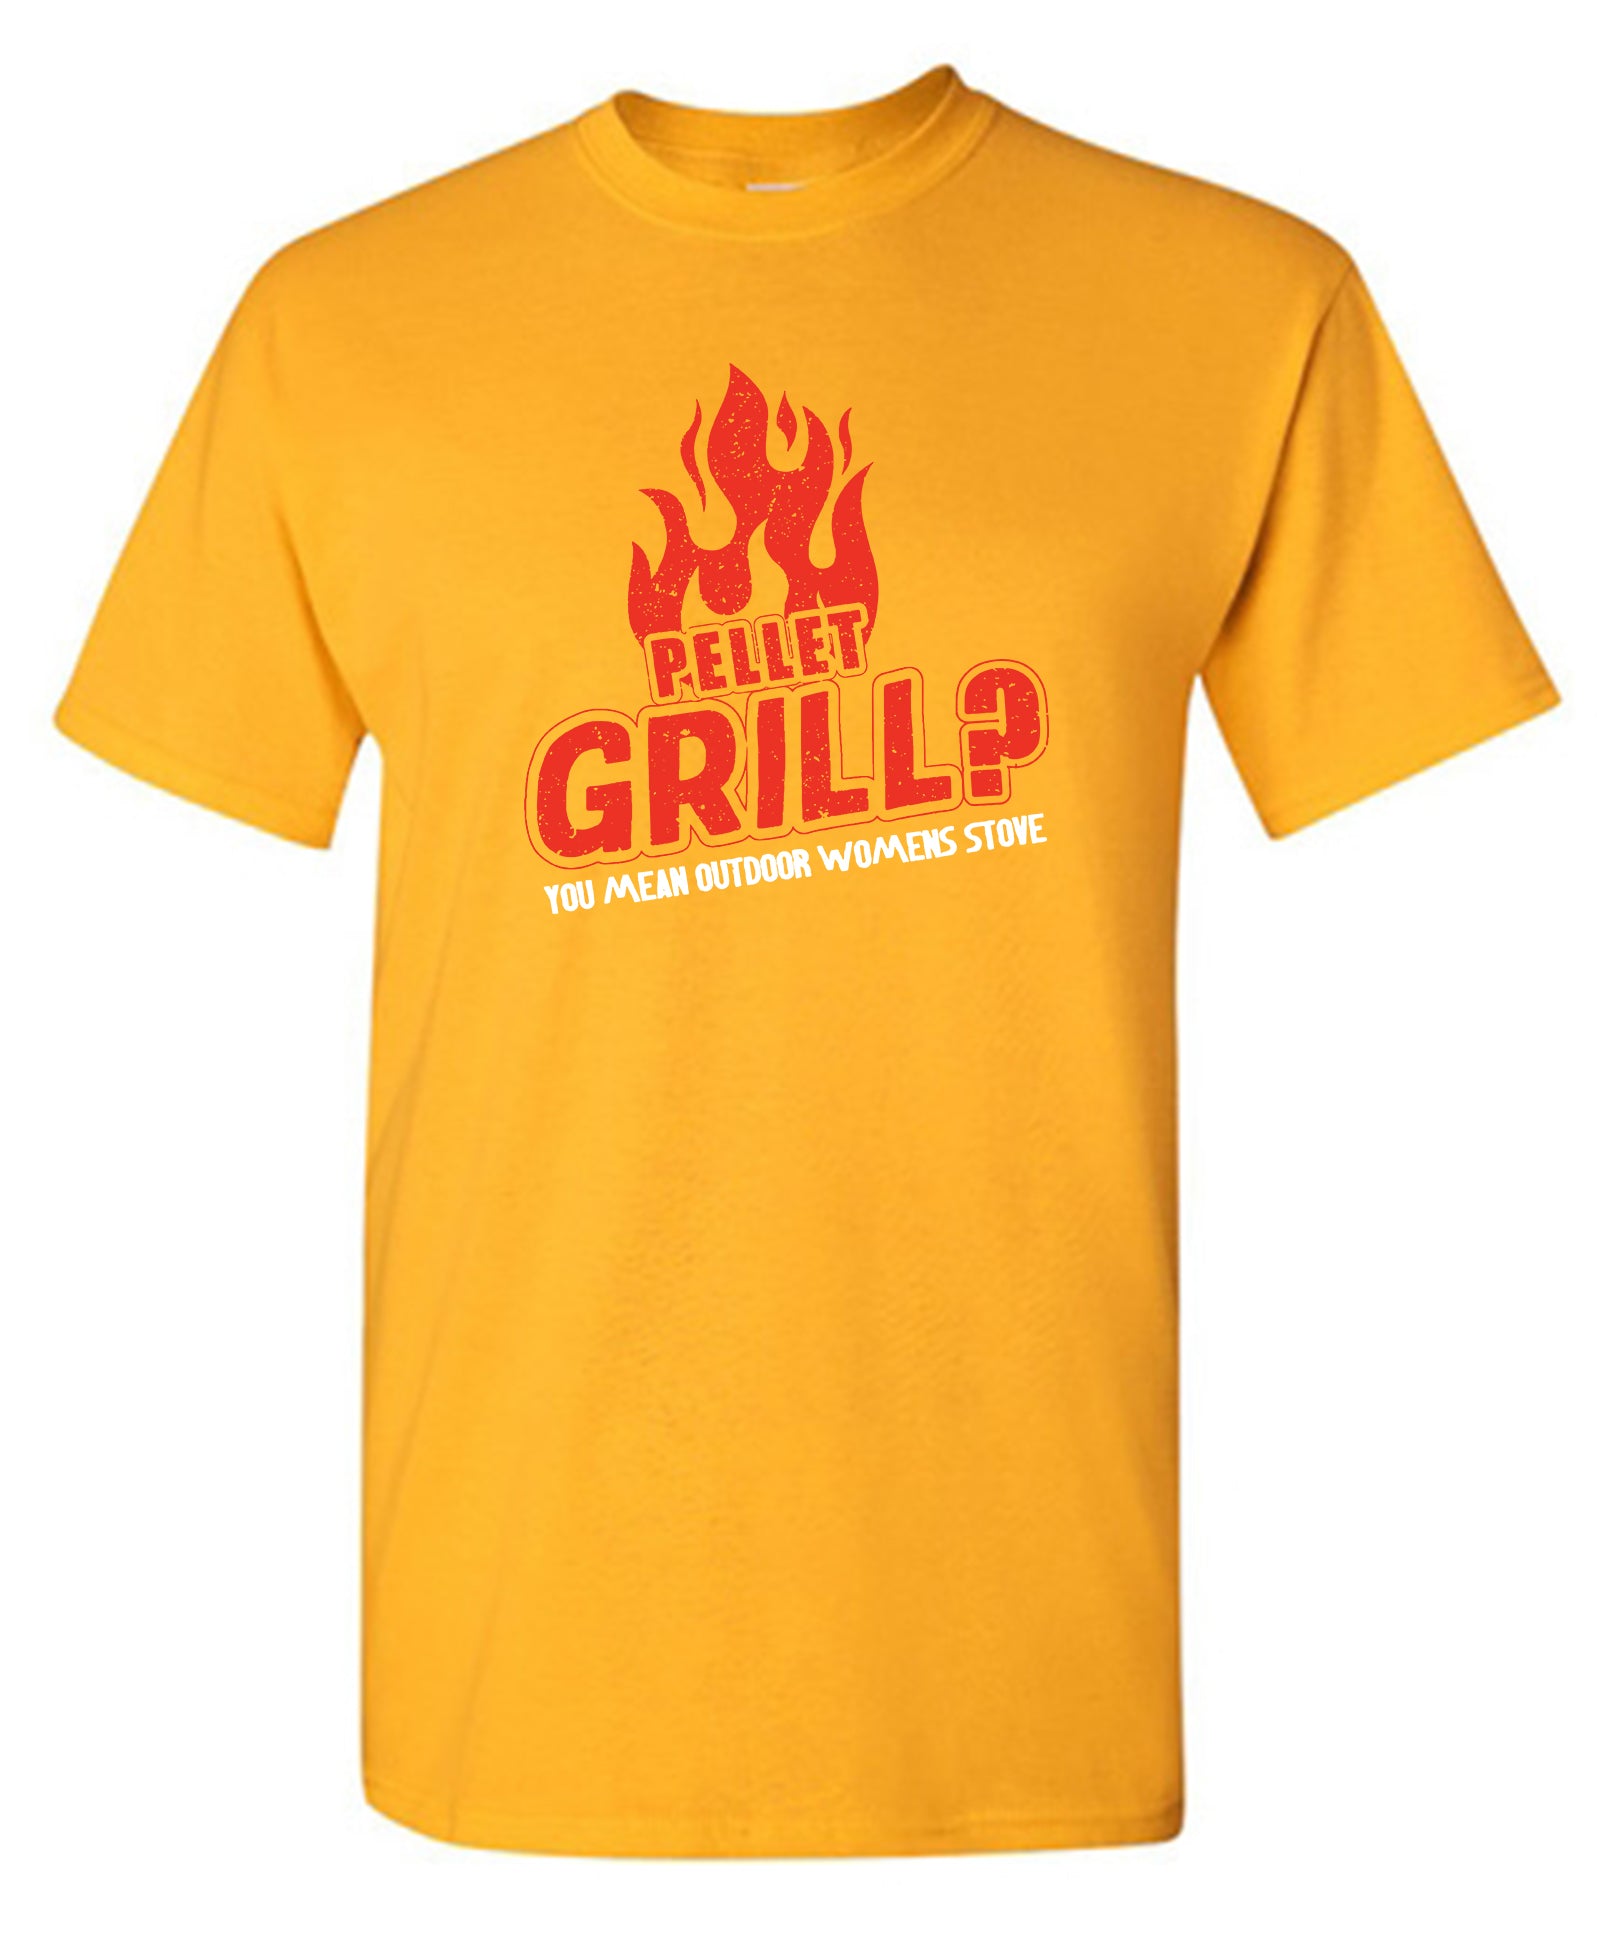 Pellet Grill! 100% Cotton - Graphic Tees